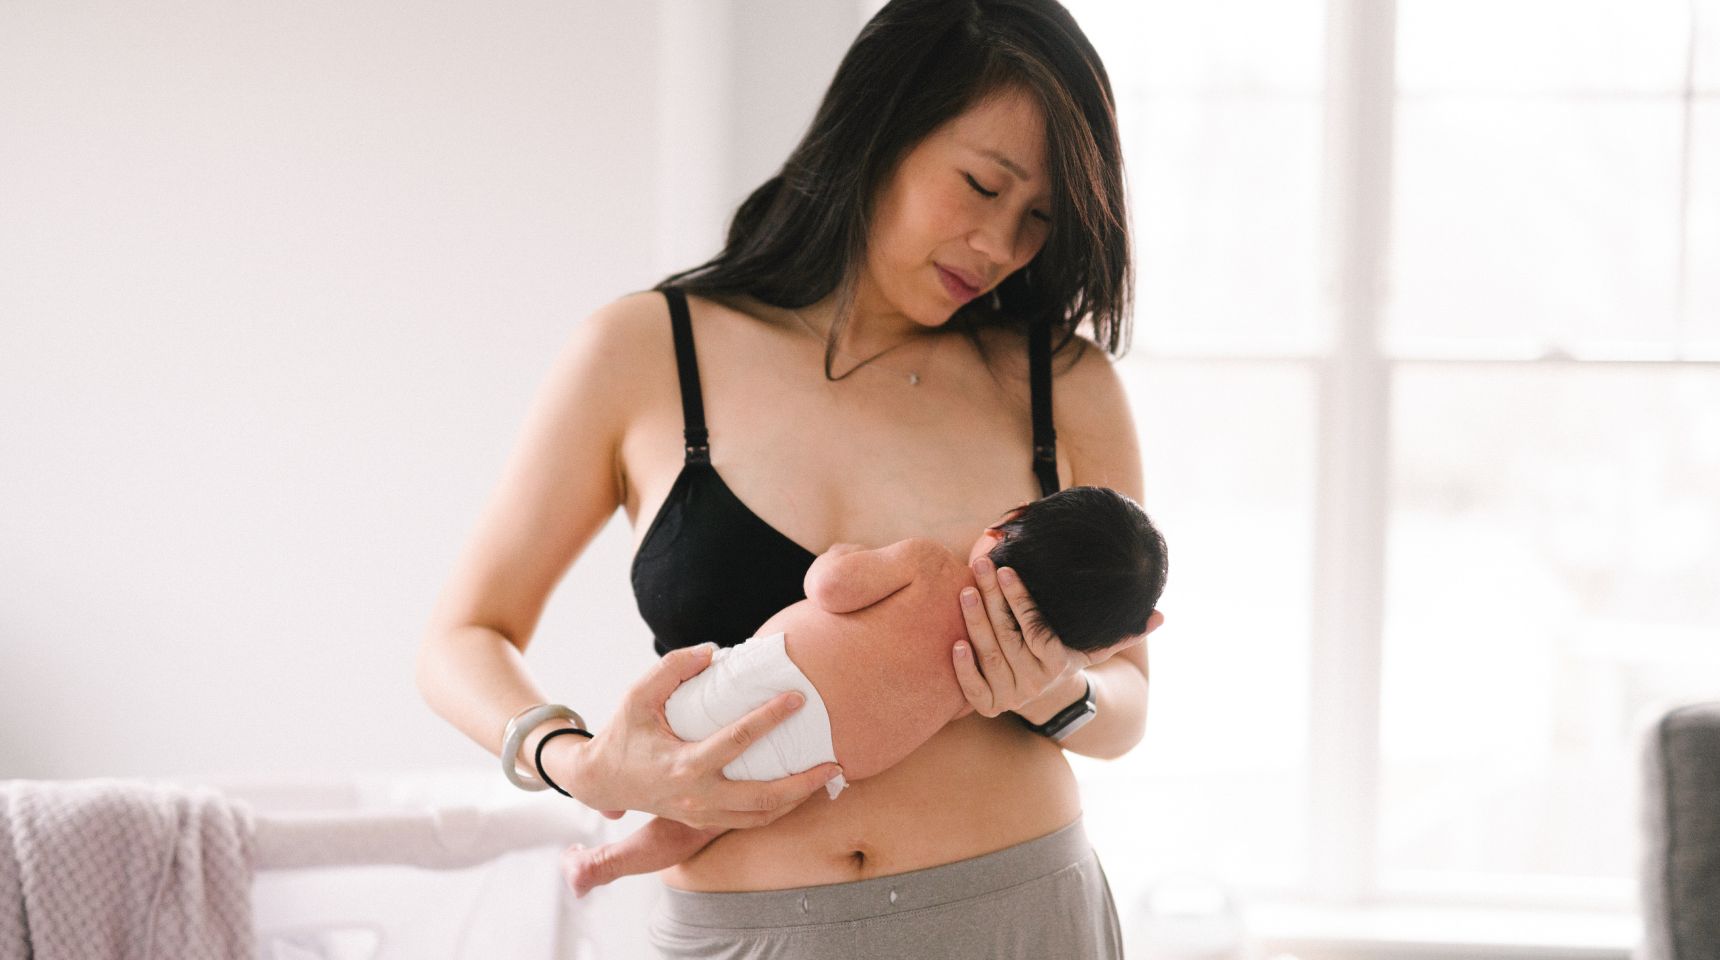 Breastfeeding: What to Expect, Breastfeeding FAQs